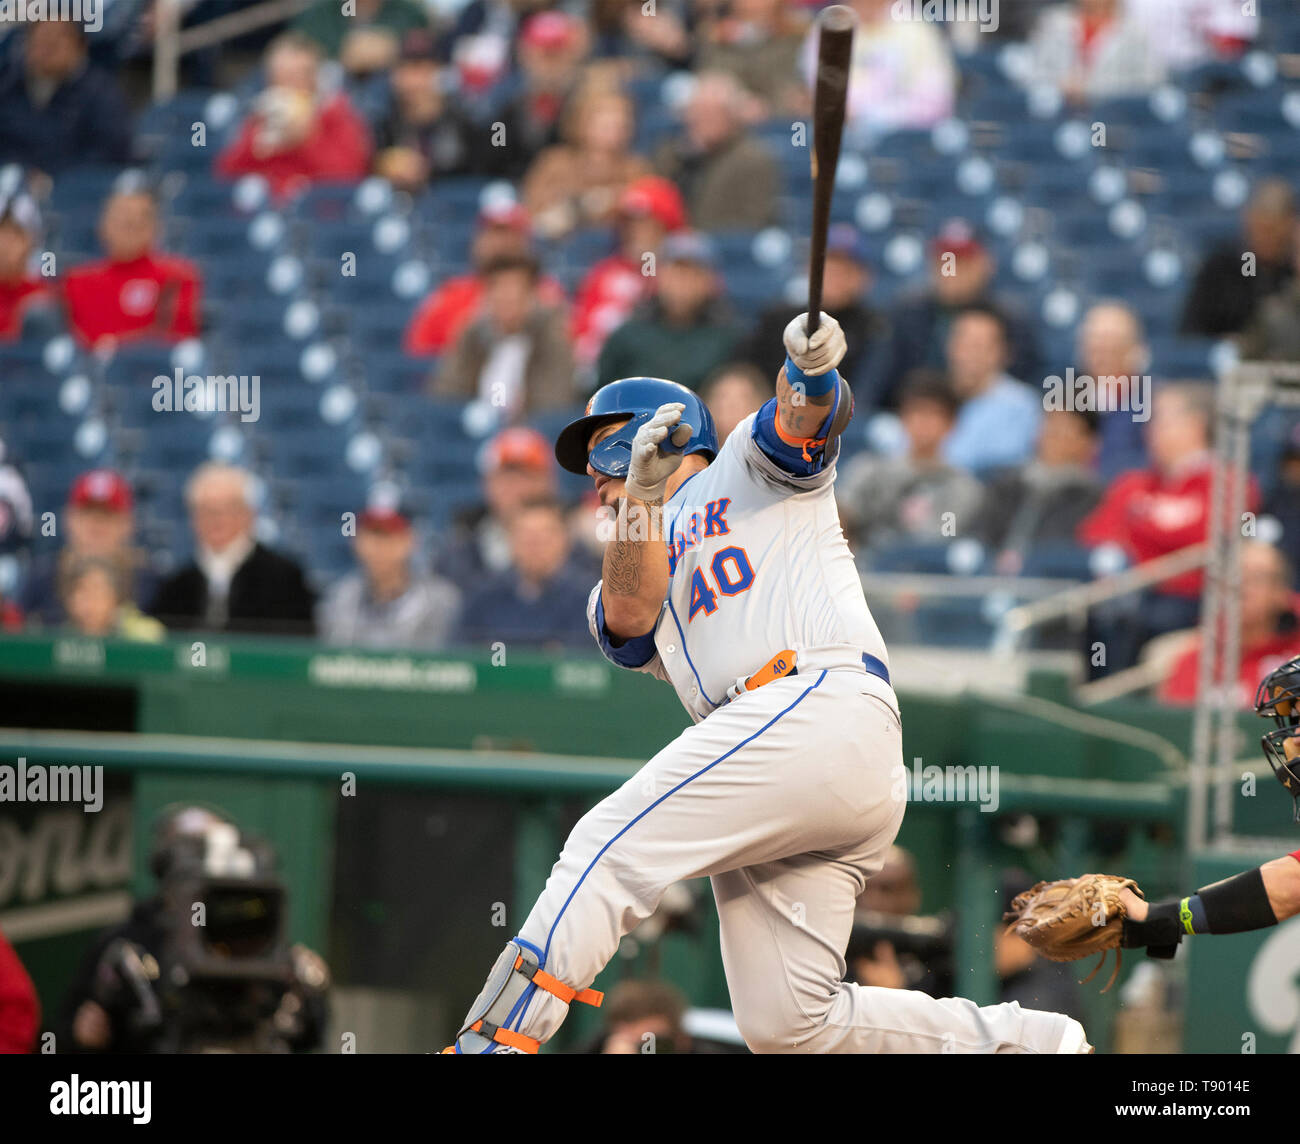 New York Mets catcher Wilson Ramos (40) connects for a first inning grand slam against the Washington Nationals at Nationals Park in Washington, D.C. on May 14, 2019. Credit: Sachs / CNP/MediaPunch (RESTRICTION: NO New York or New Jersey Newspapers or newspapers within a 75 mile radius of New York City) Stock Photo